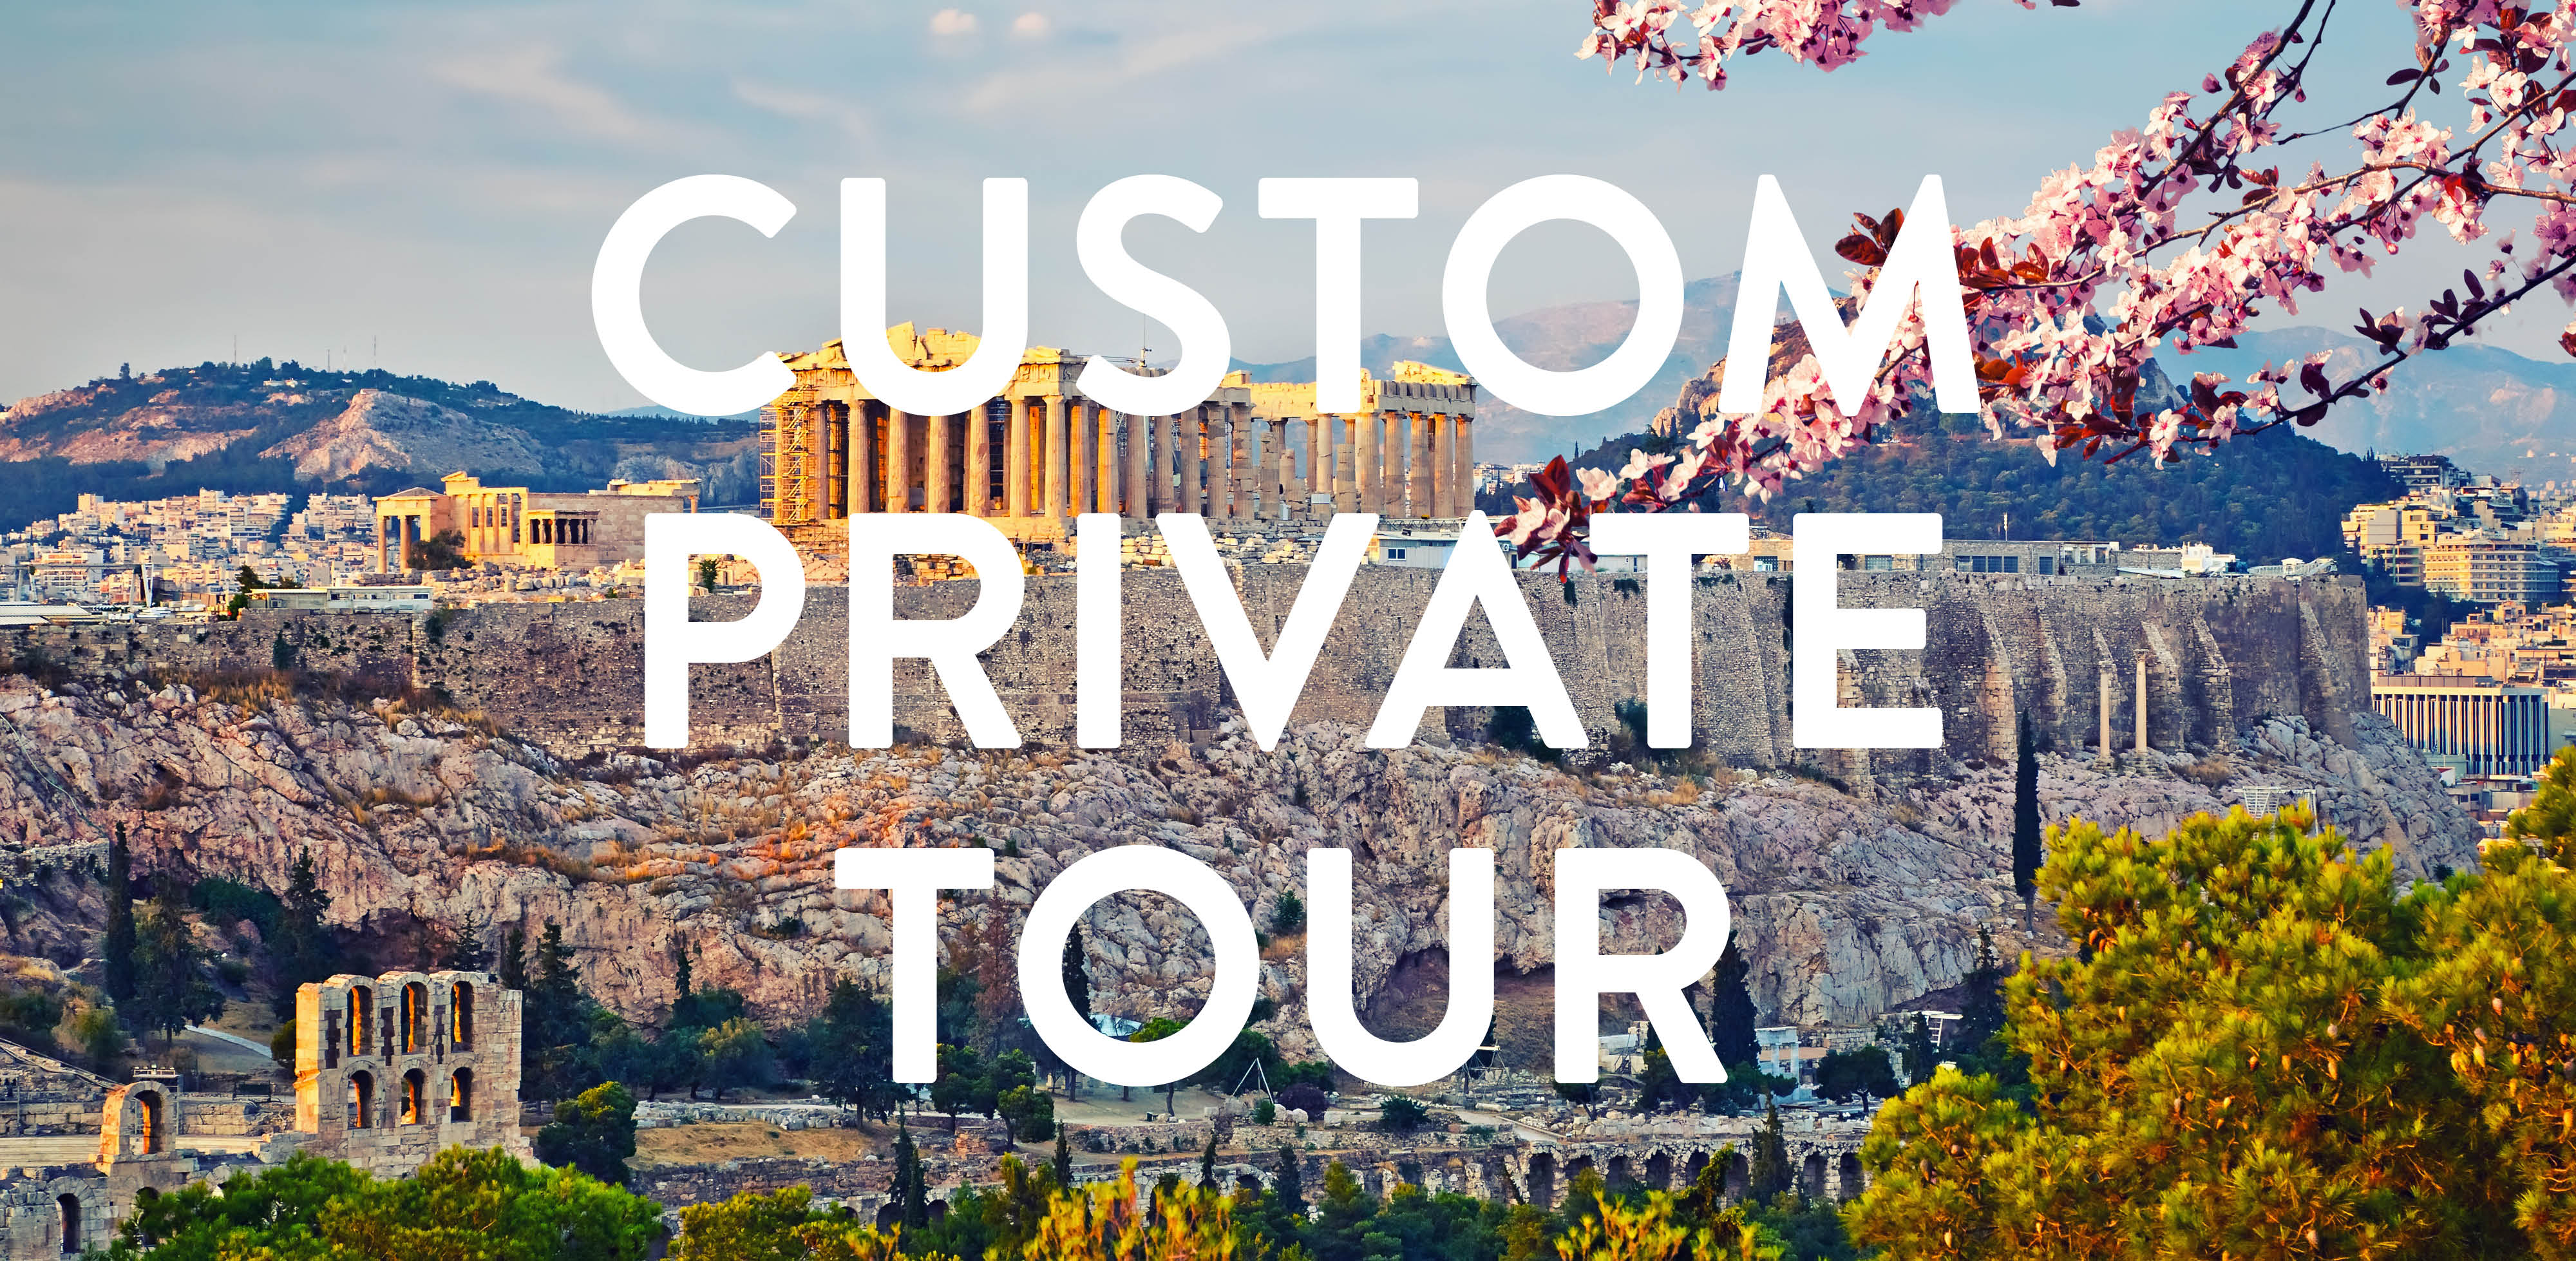 Create Your Own Tour